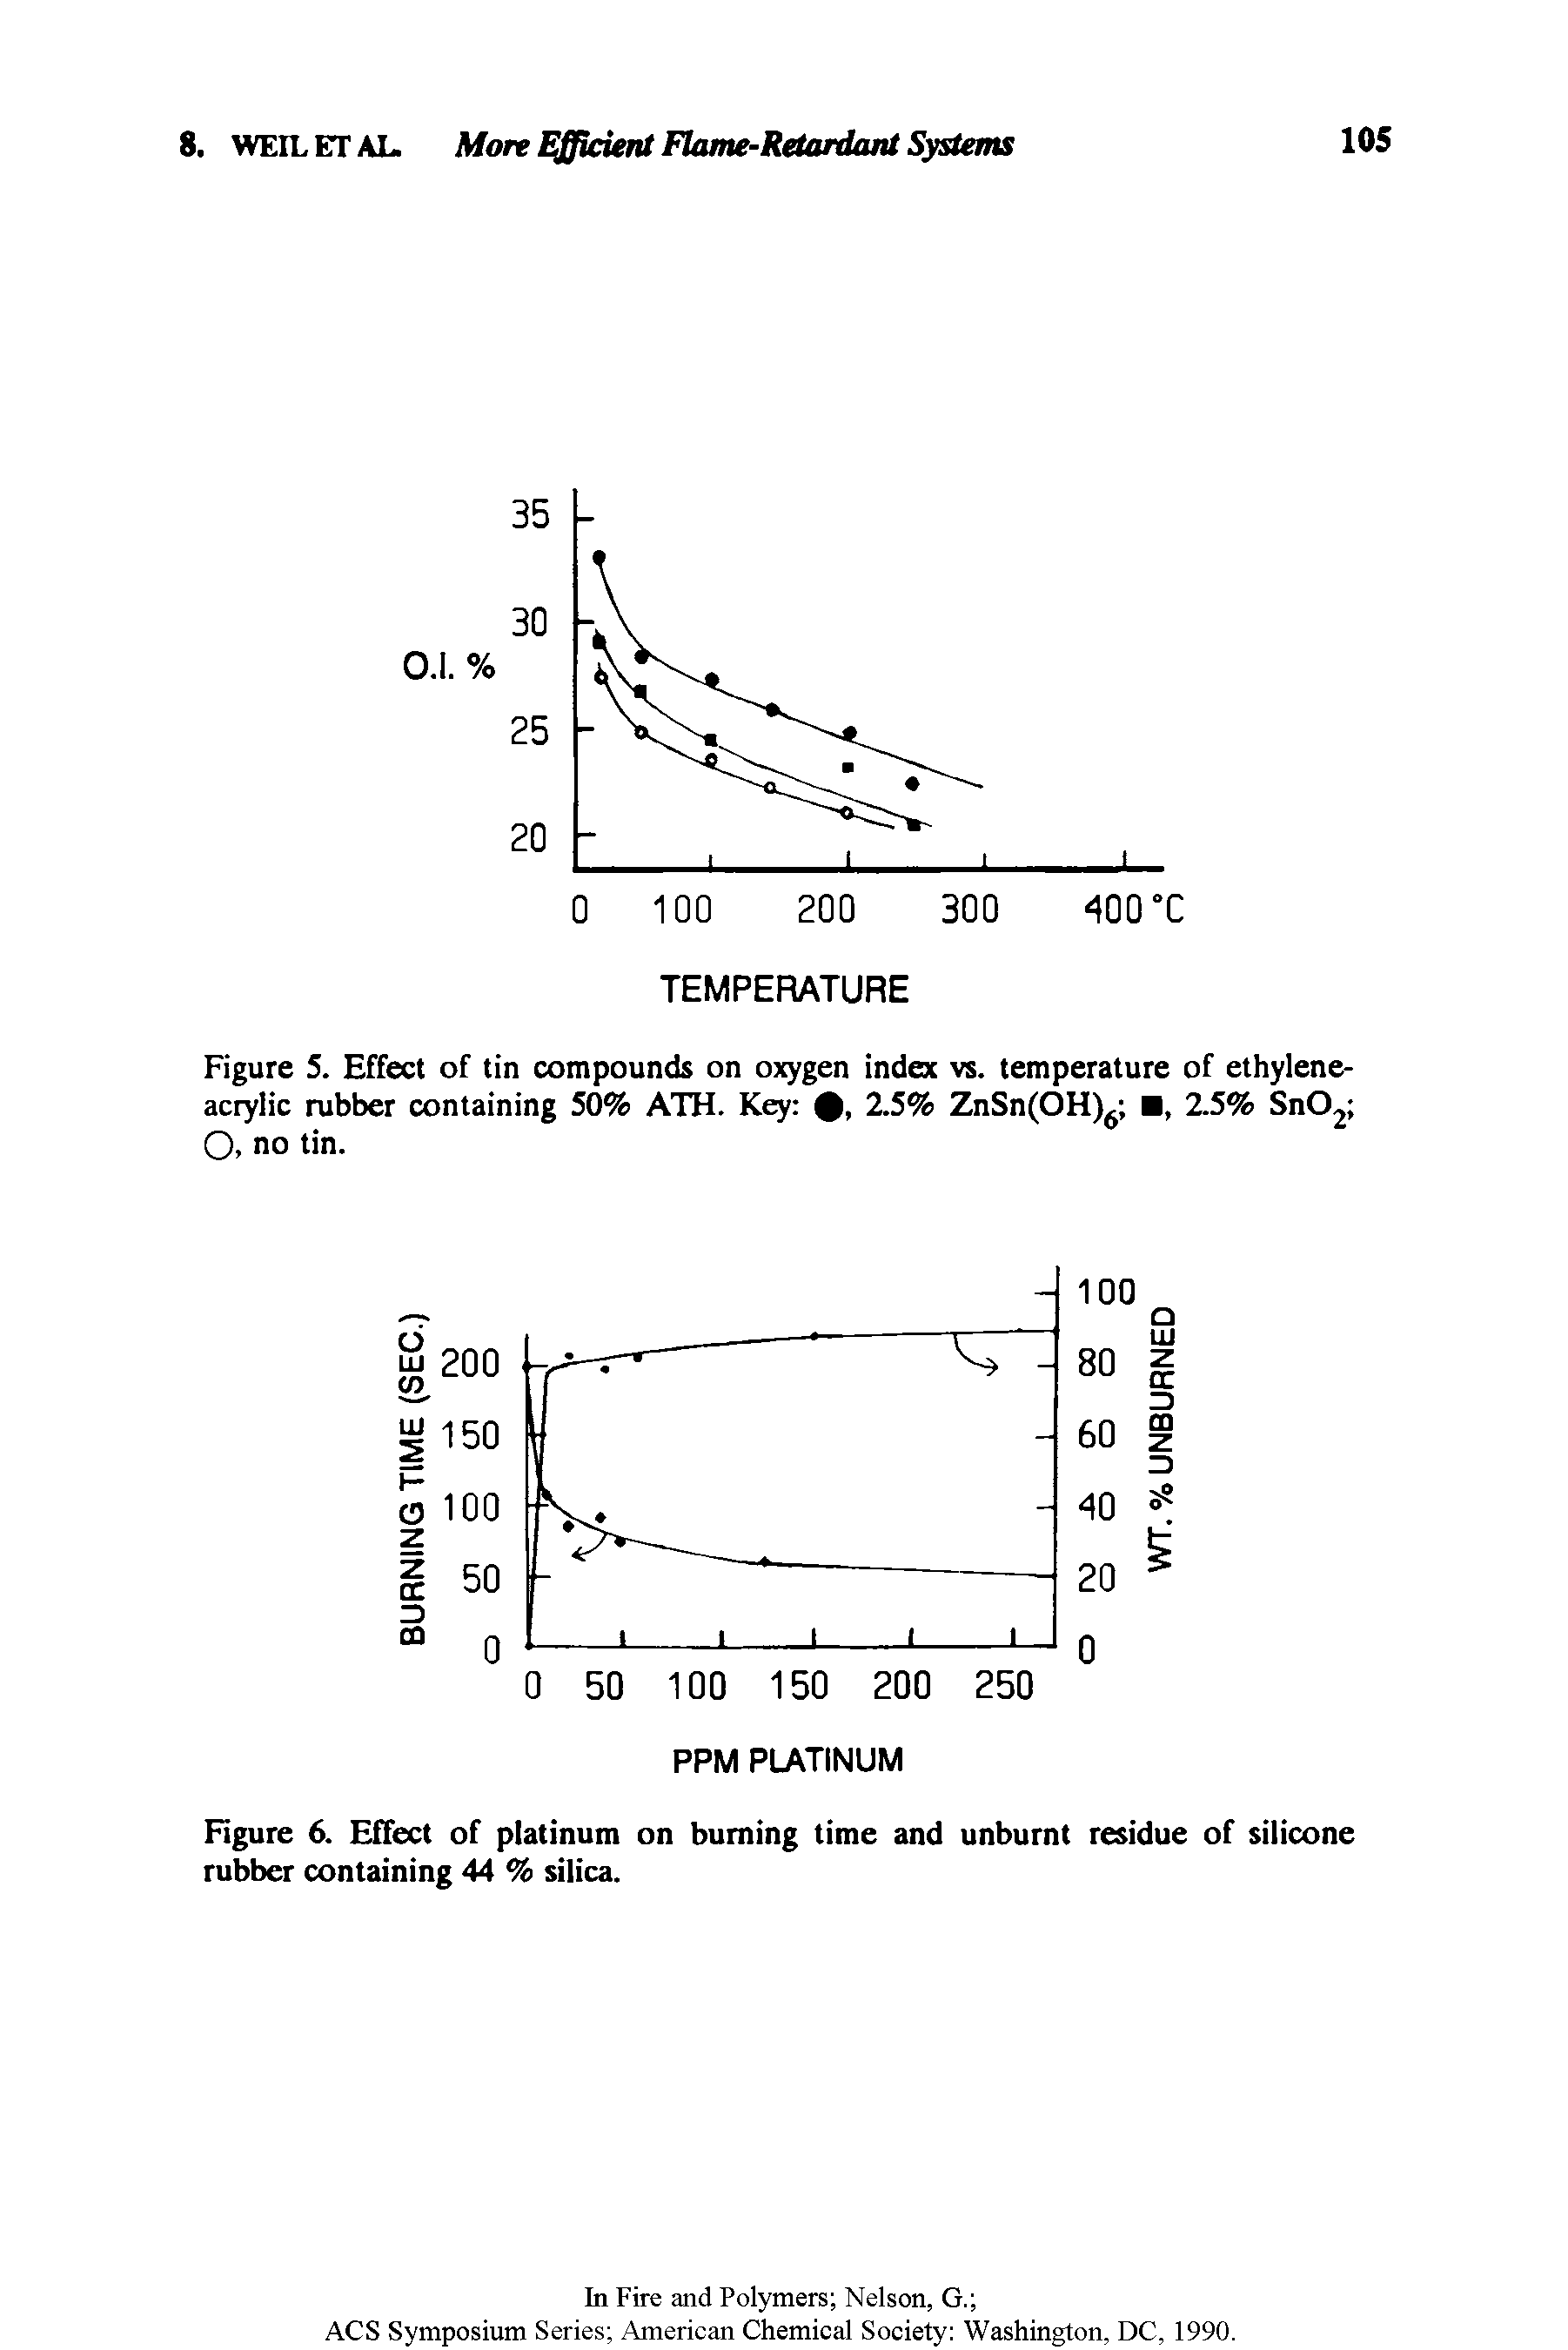 Figure 5. Effect of tin compounds on oxygen index vs. temperature of ethylene-acrylic rubber containing 50% ATH. Key 0, 2.5% ZnSn(OH)6 , 2.5% Sn02 O. no tin.